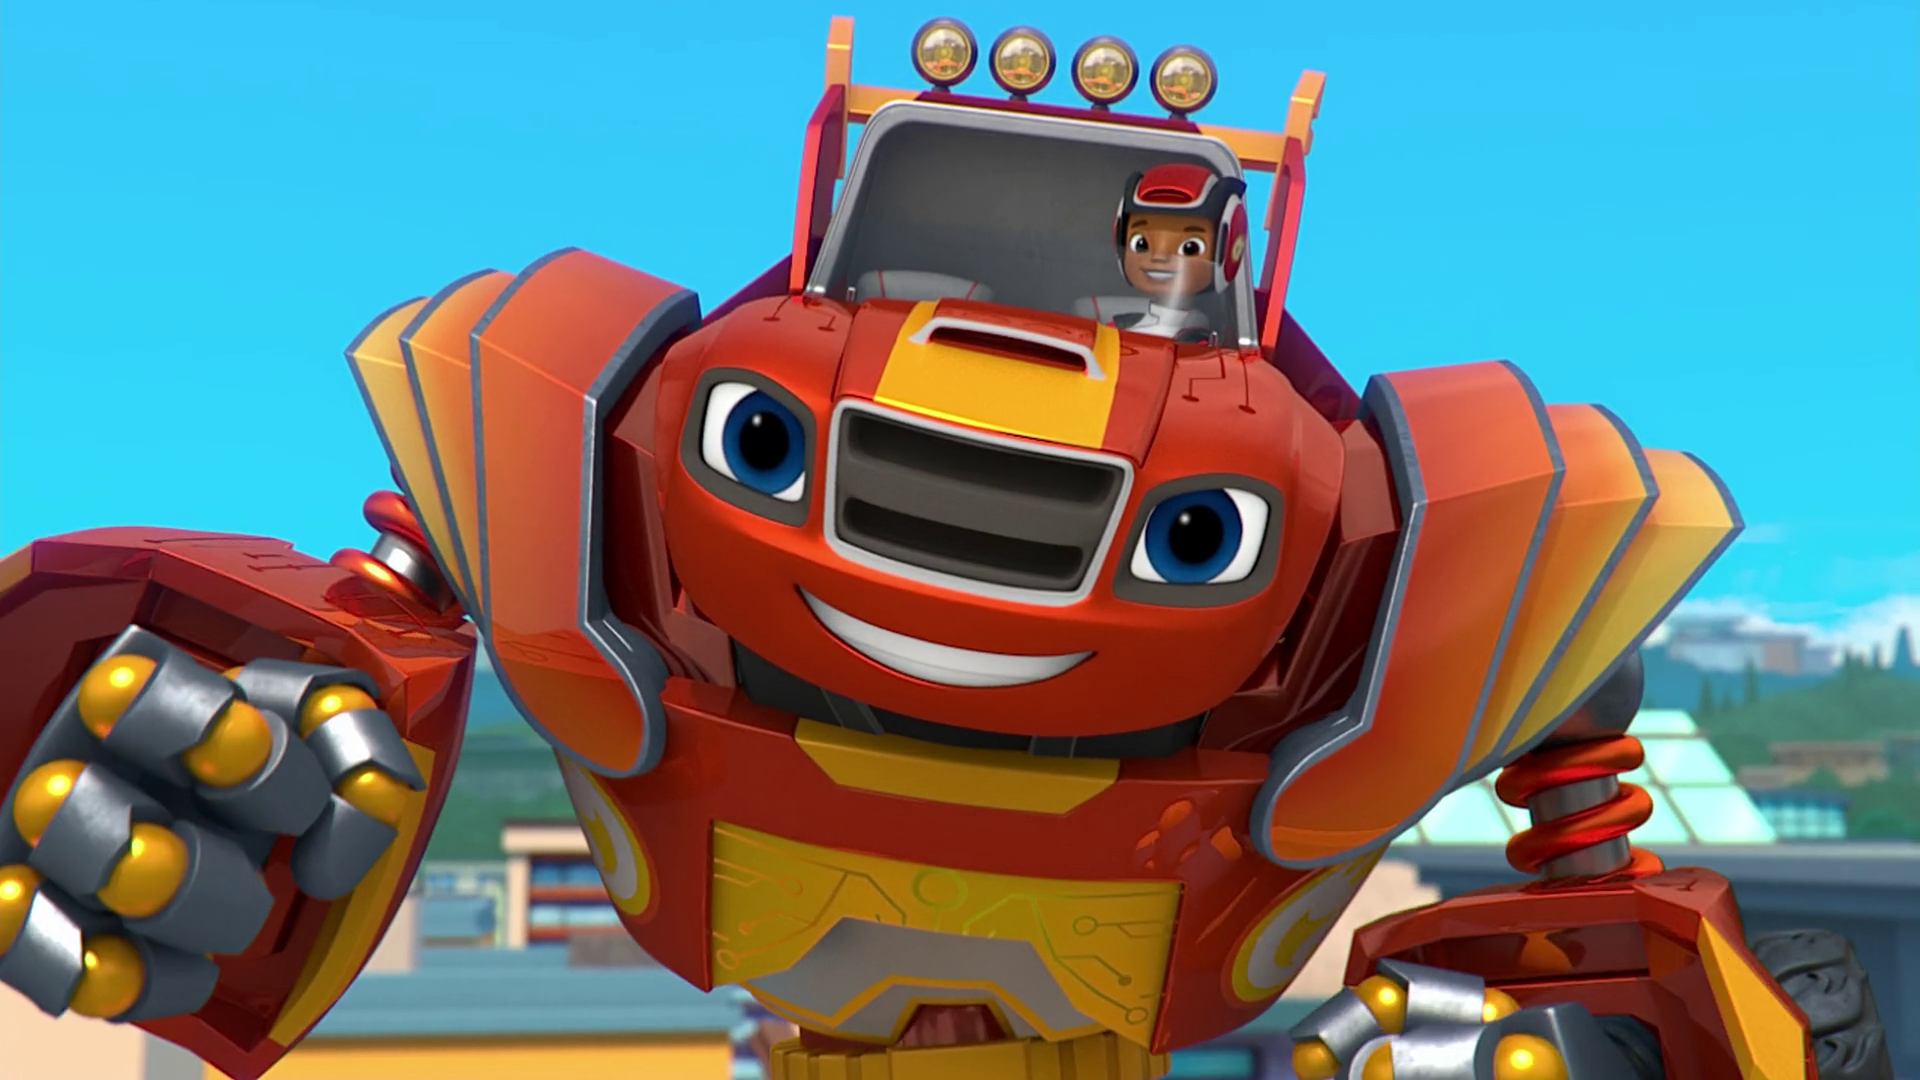 Robot Power (song) | Blaze and the Monster Machines Wiki | Fandom